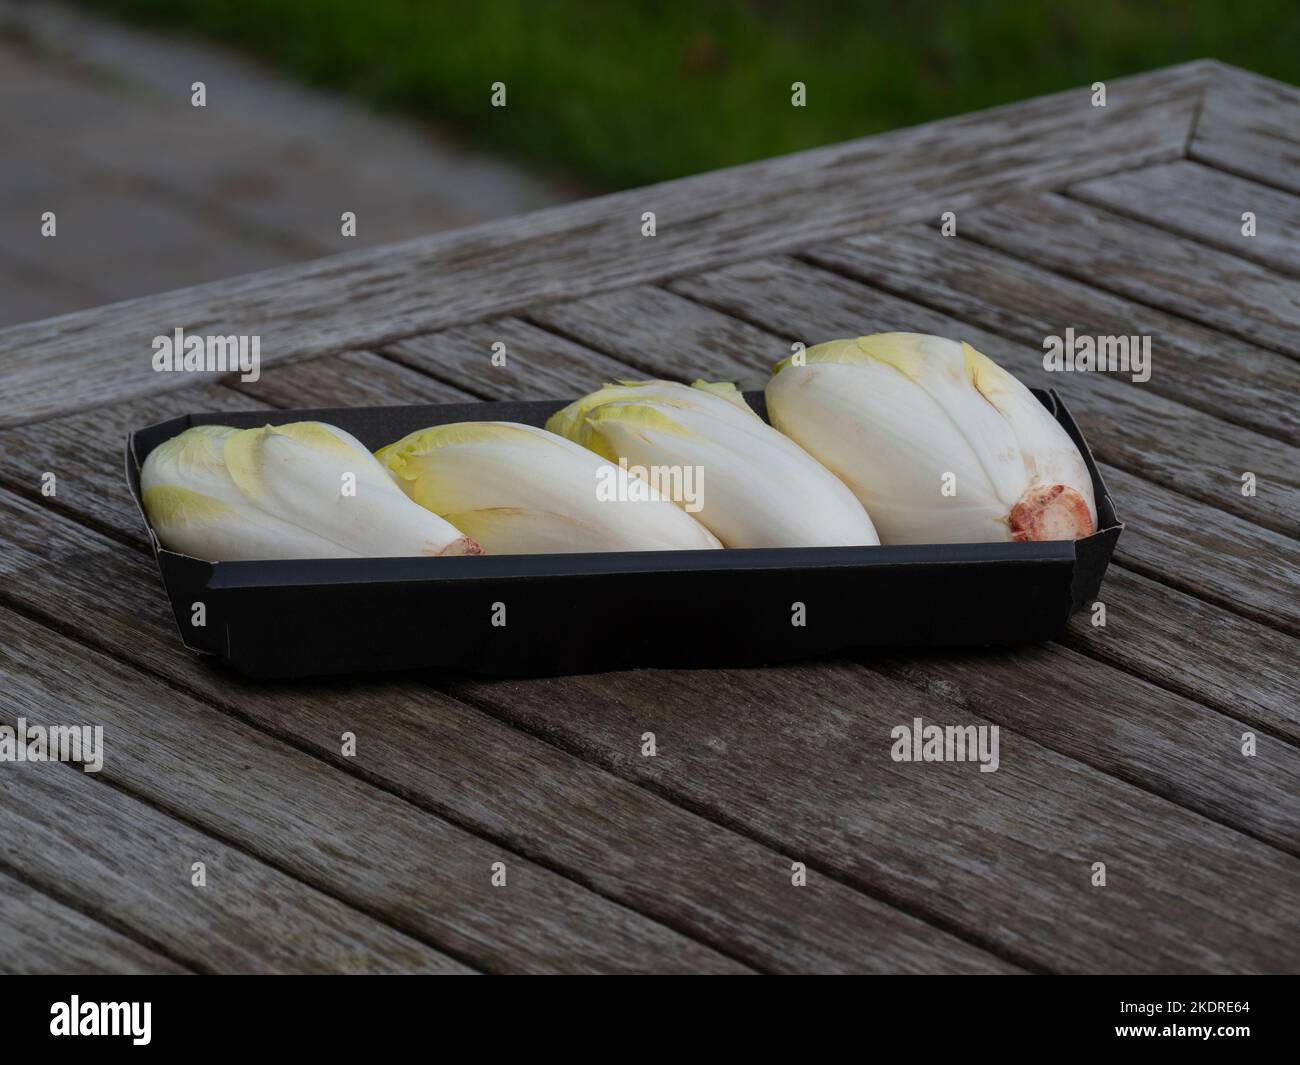 chicory endive on a black dish on a wooden table Stock Photo